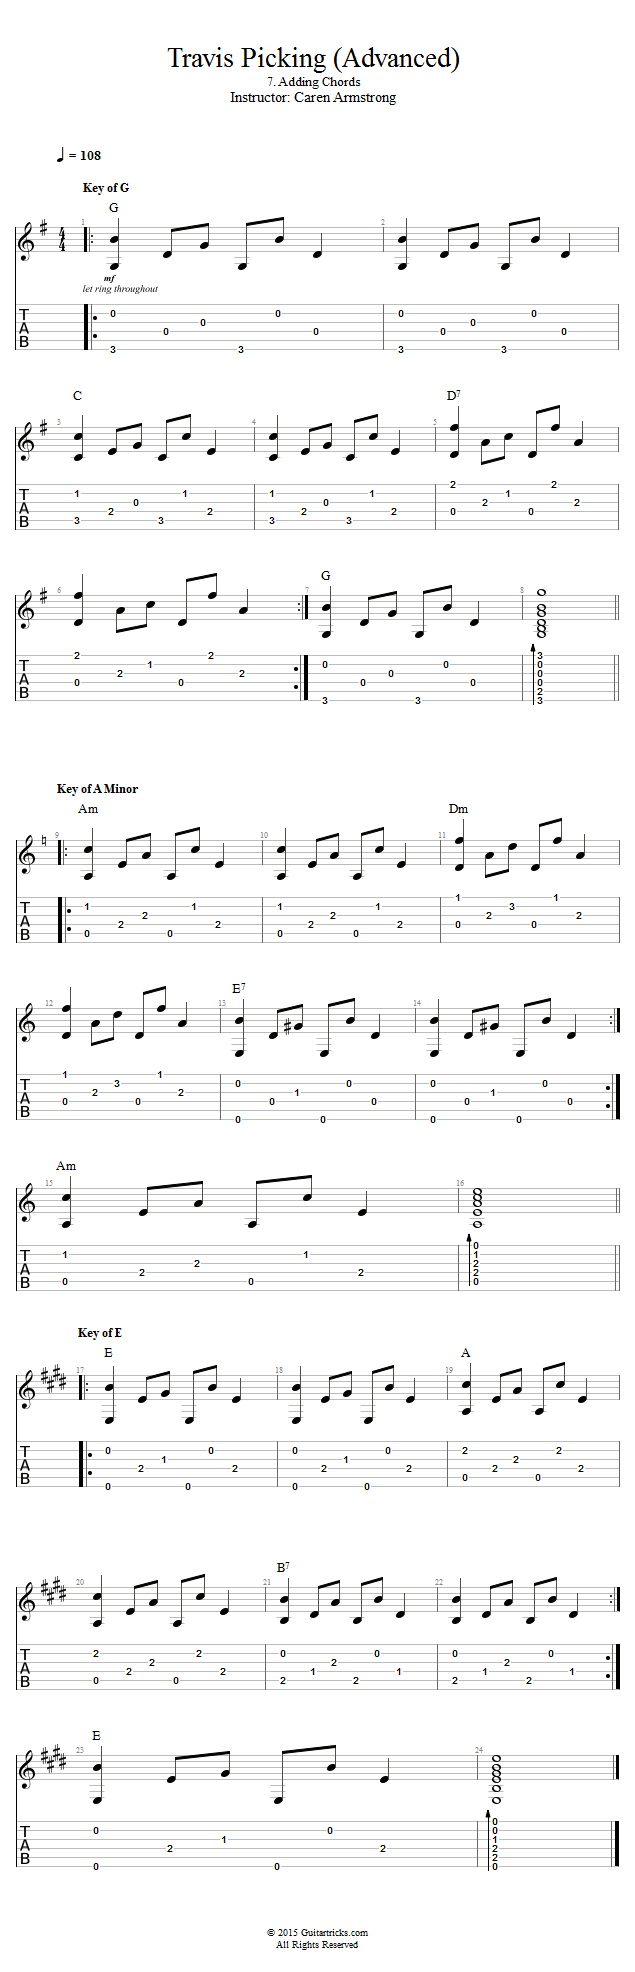 Adding Chords song notation